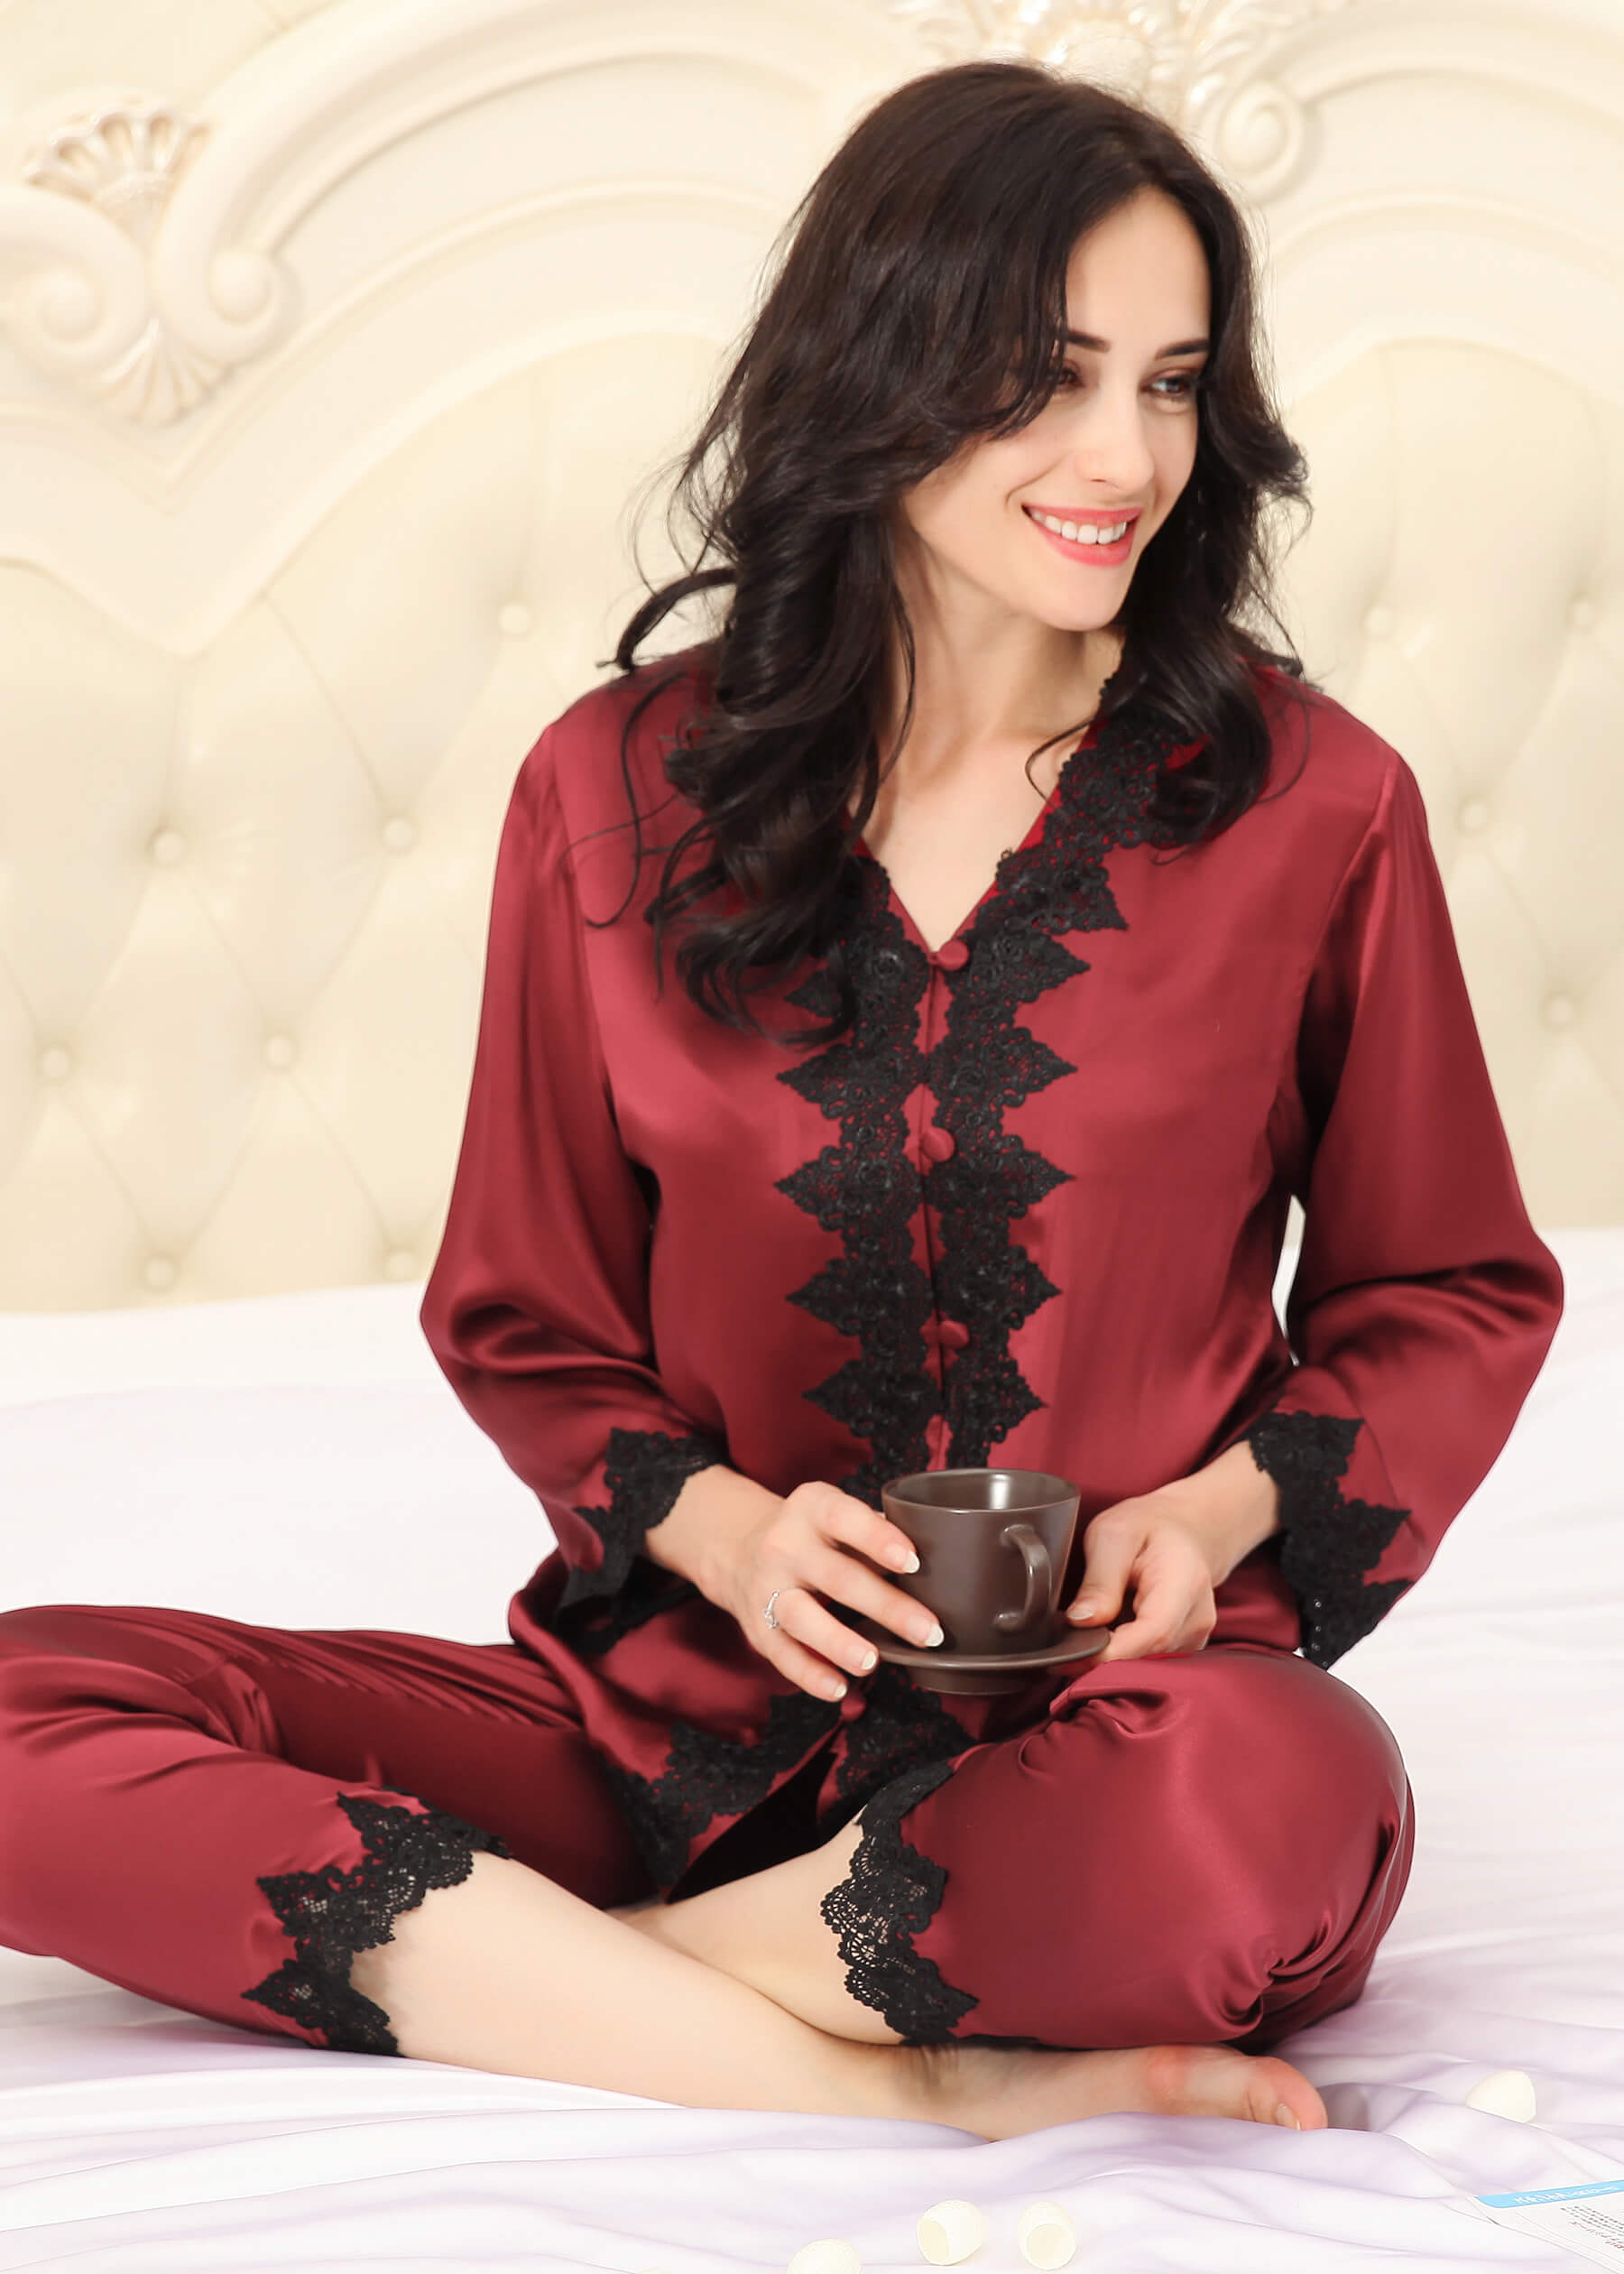 LilySilk Silk Pajamas for Women with Contrast Trimming